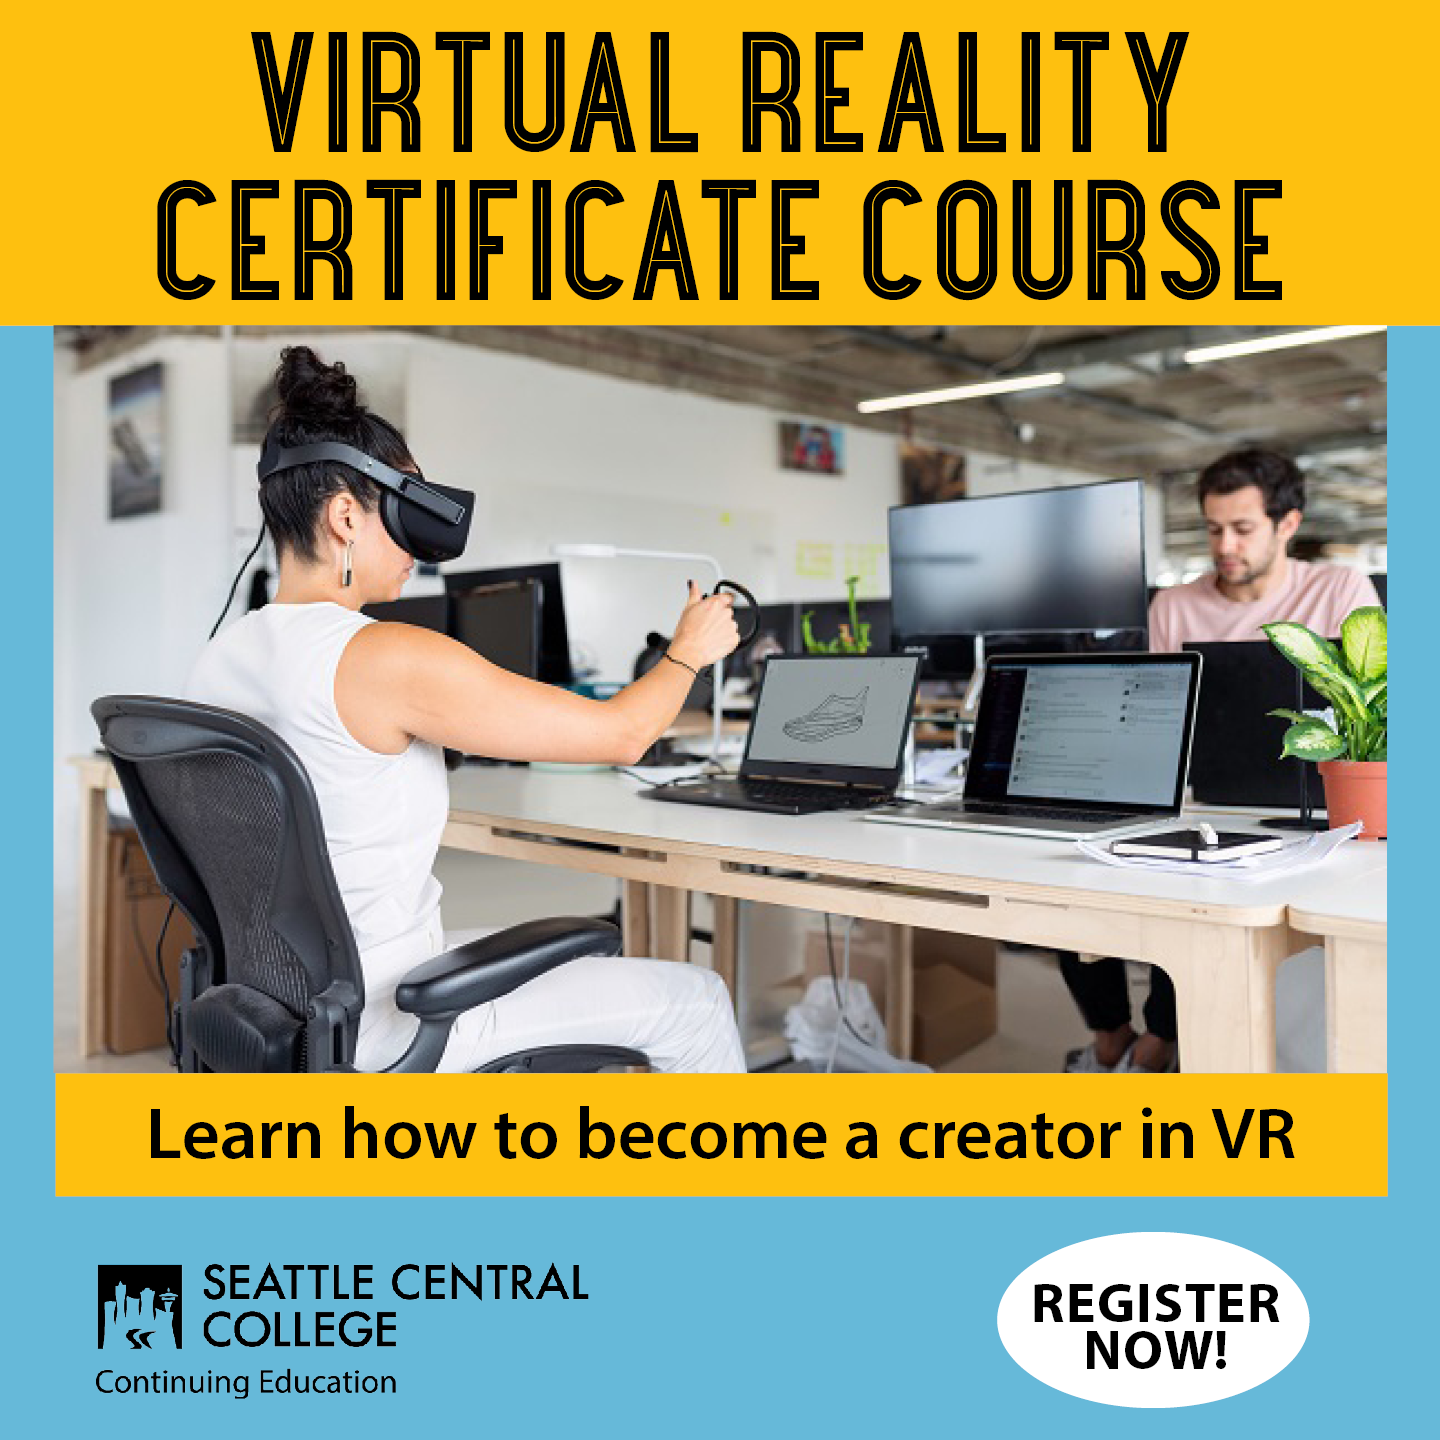 Virtual Reality Certificate Course - Continuing Education at Seattle Central College